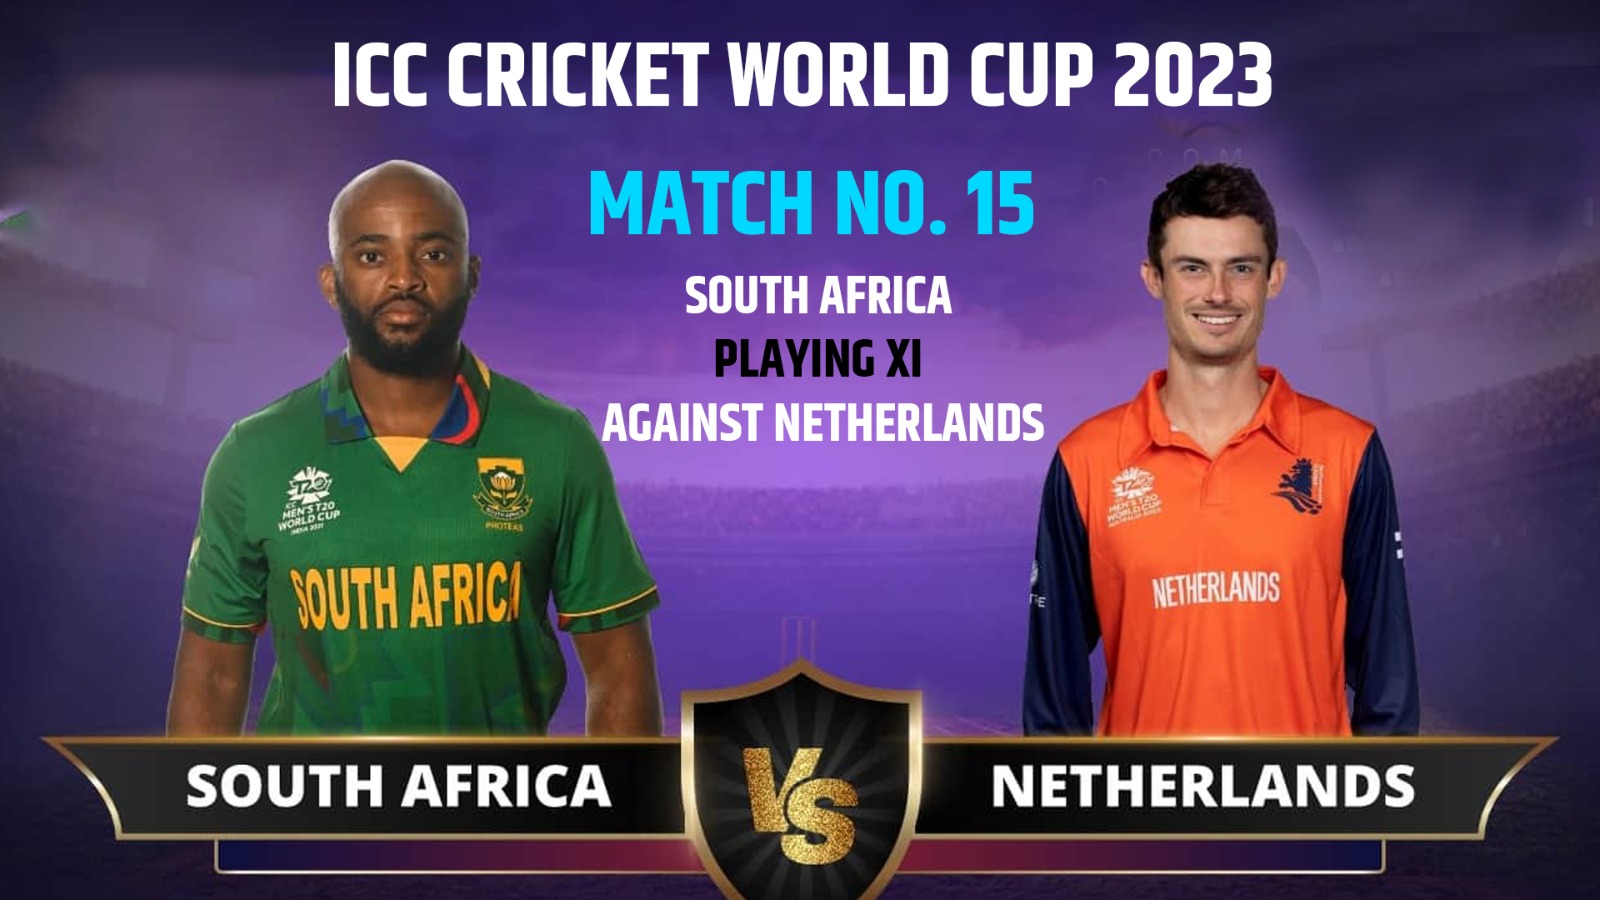 ICC Cricket World Cup 2023, Match No. 15: South Africa Playing XI against Netherlands